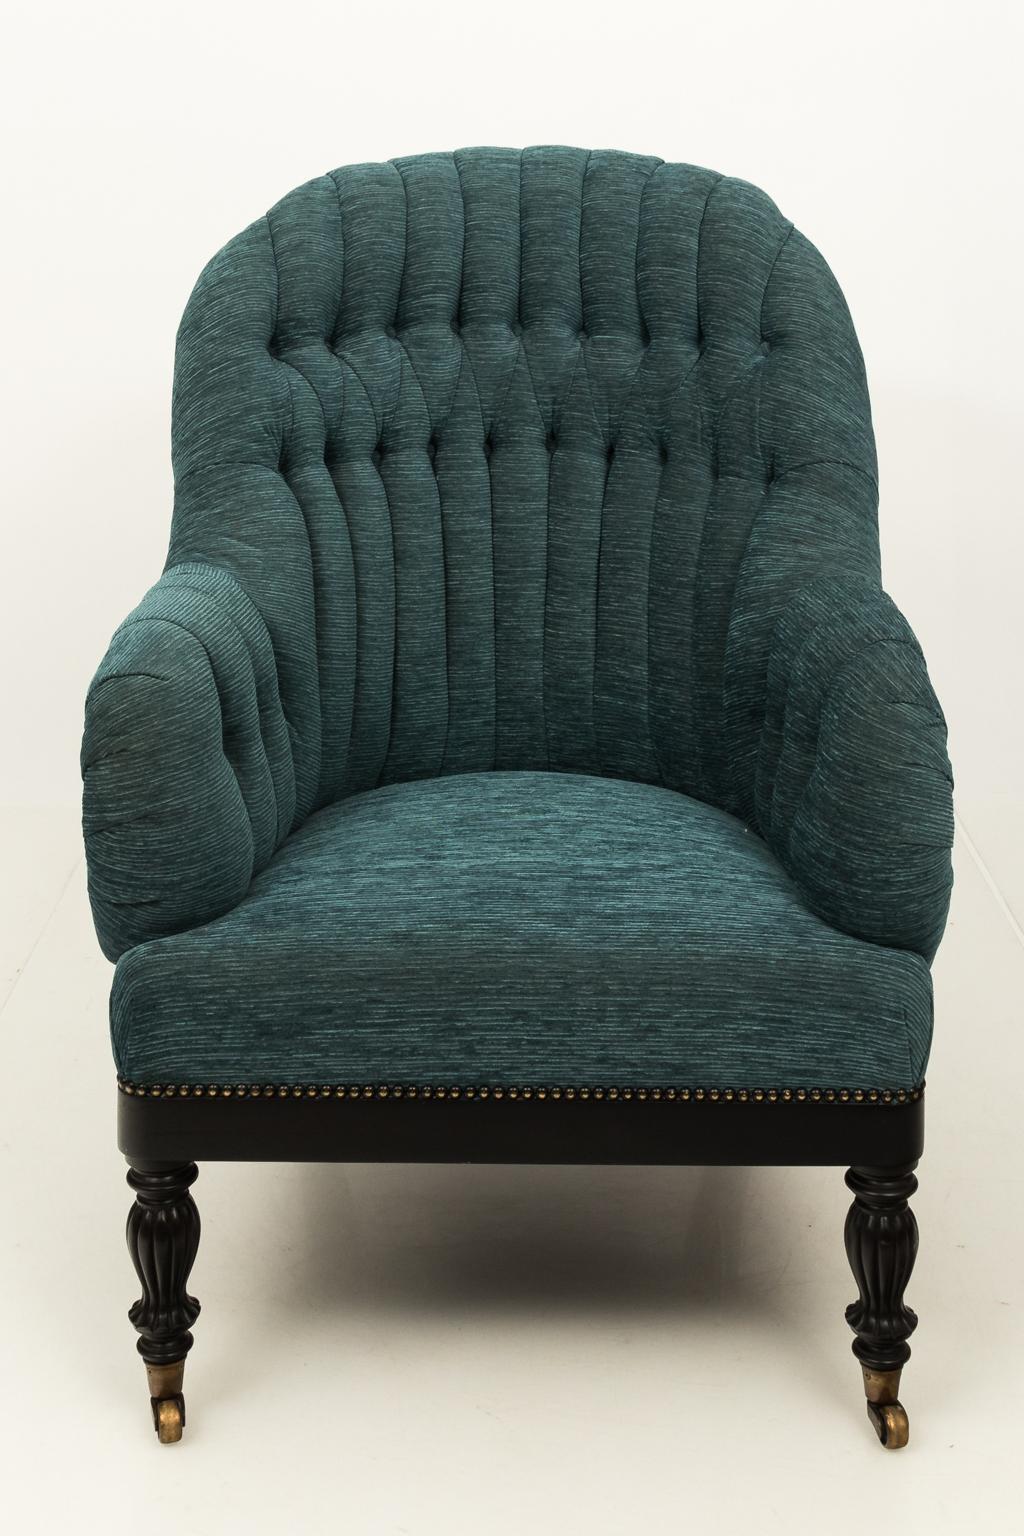 Early 20th Century French Slipper Chair 1